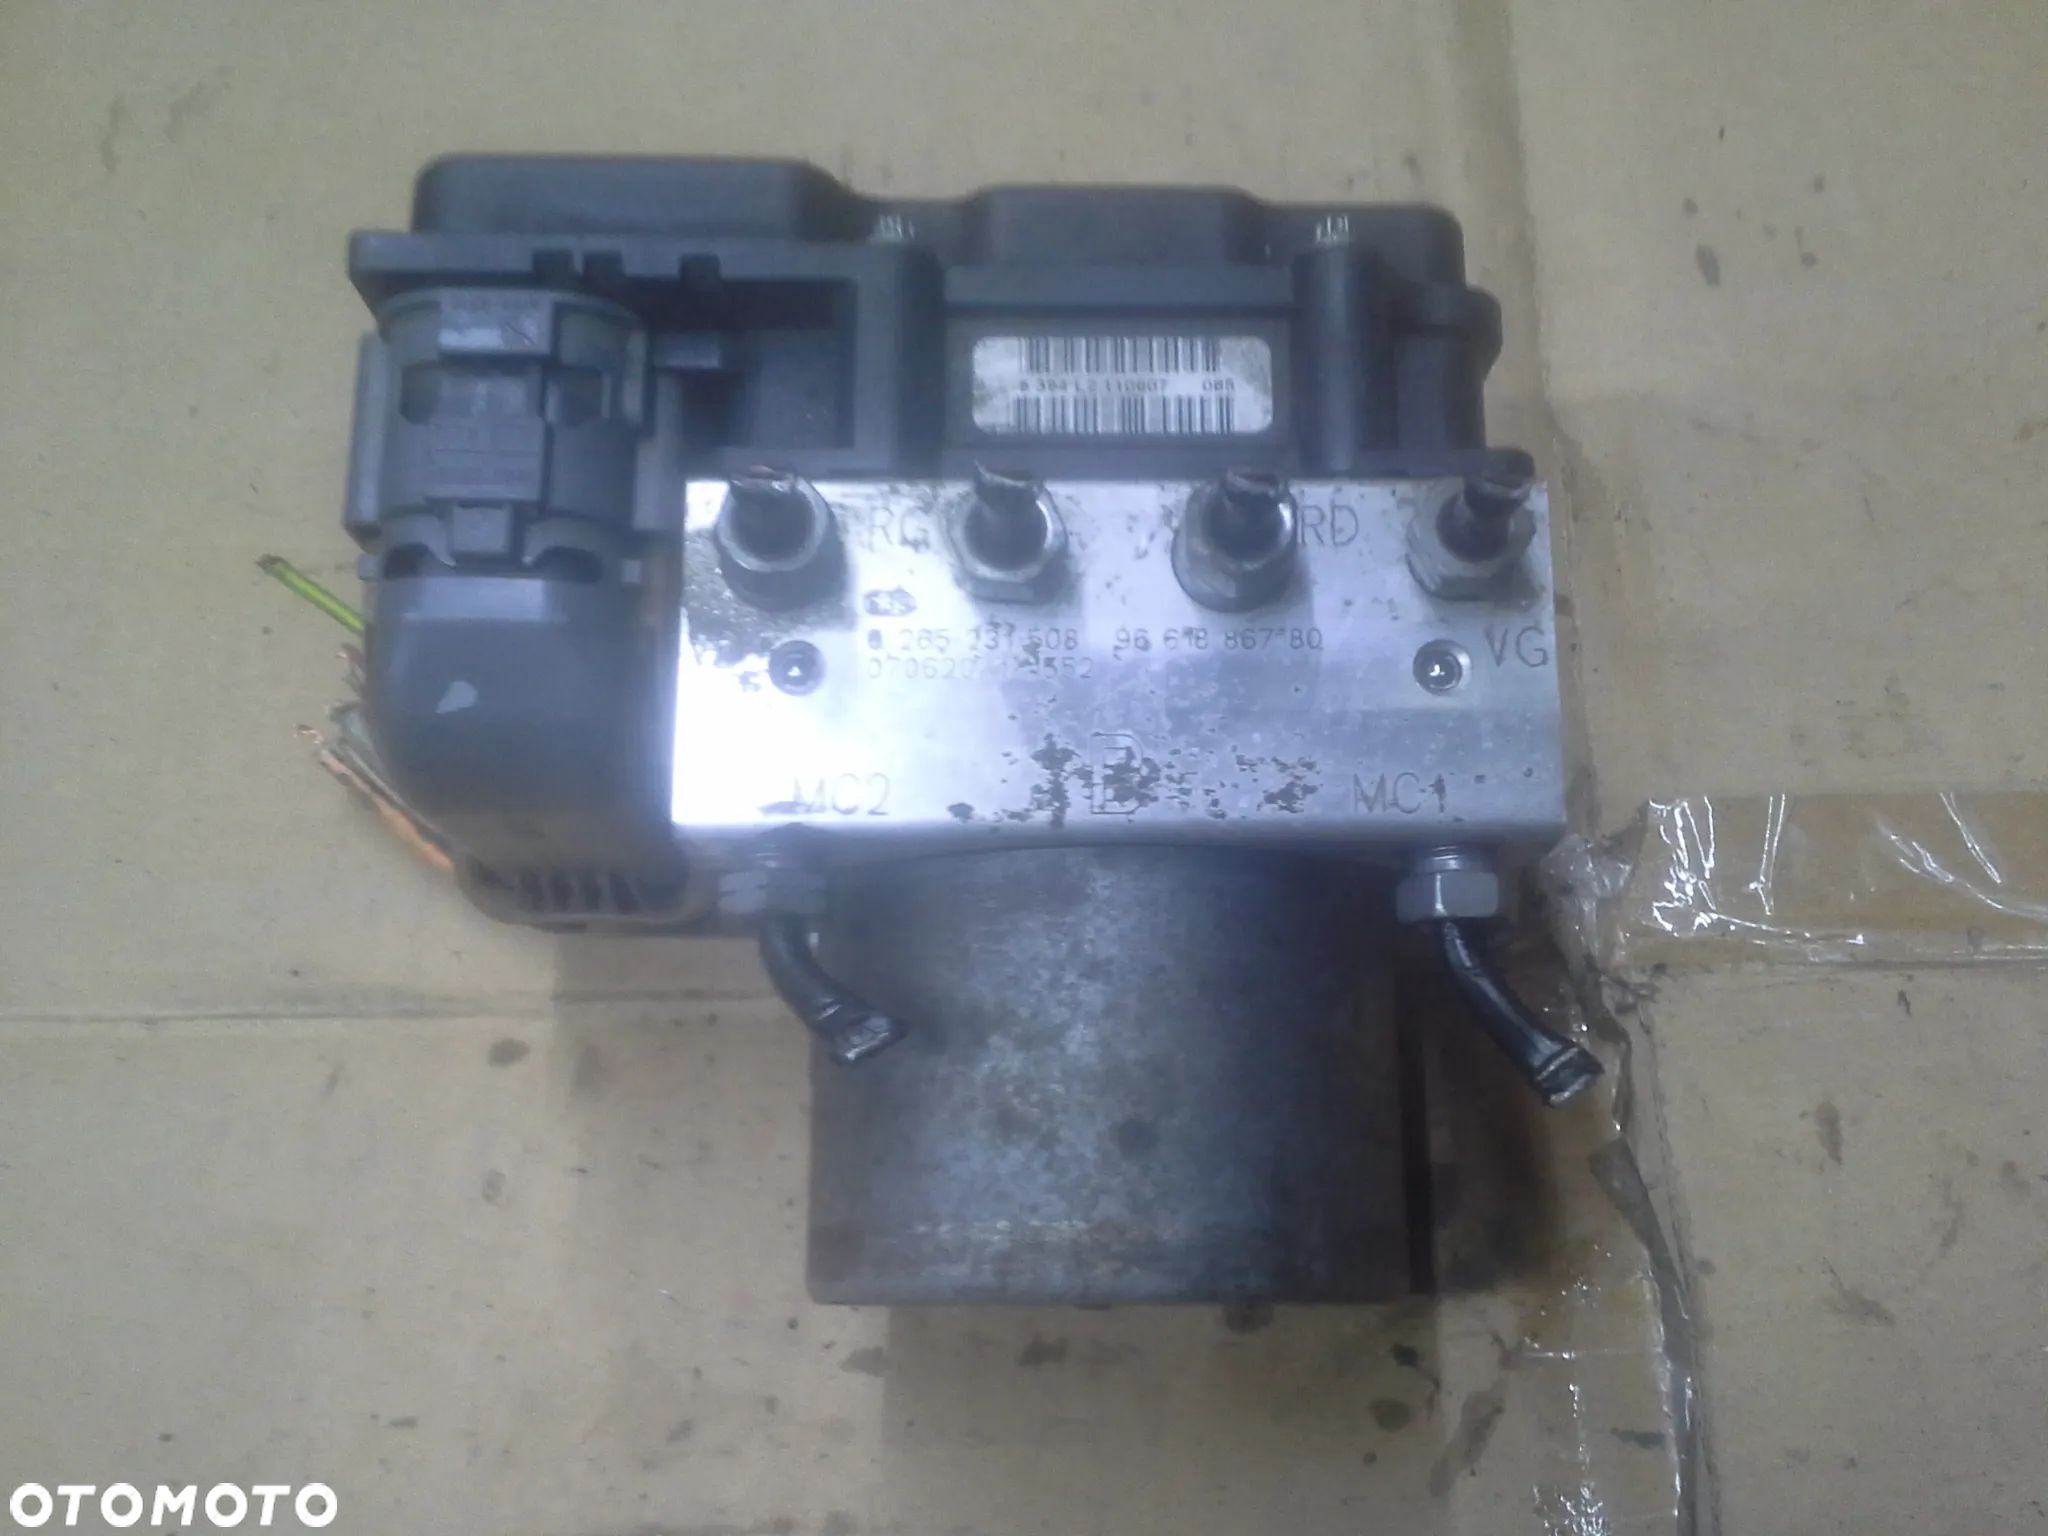 Peugeot 307 1.6 HDi pompa abs 9663345480 0265231508 - 5